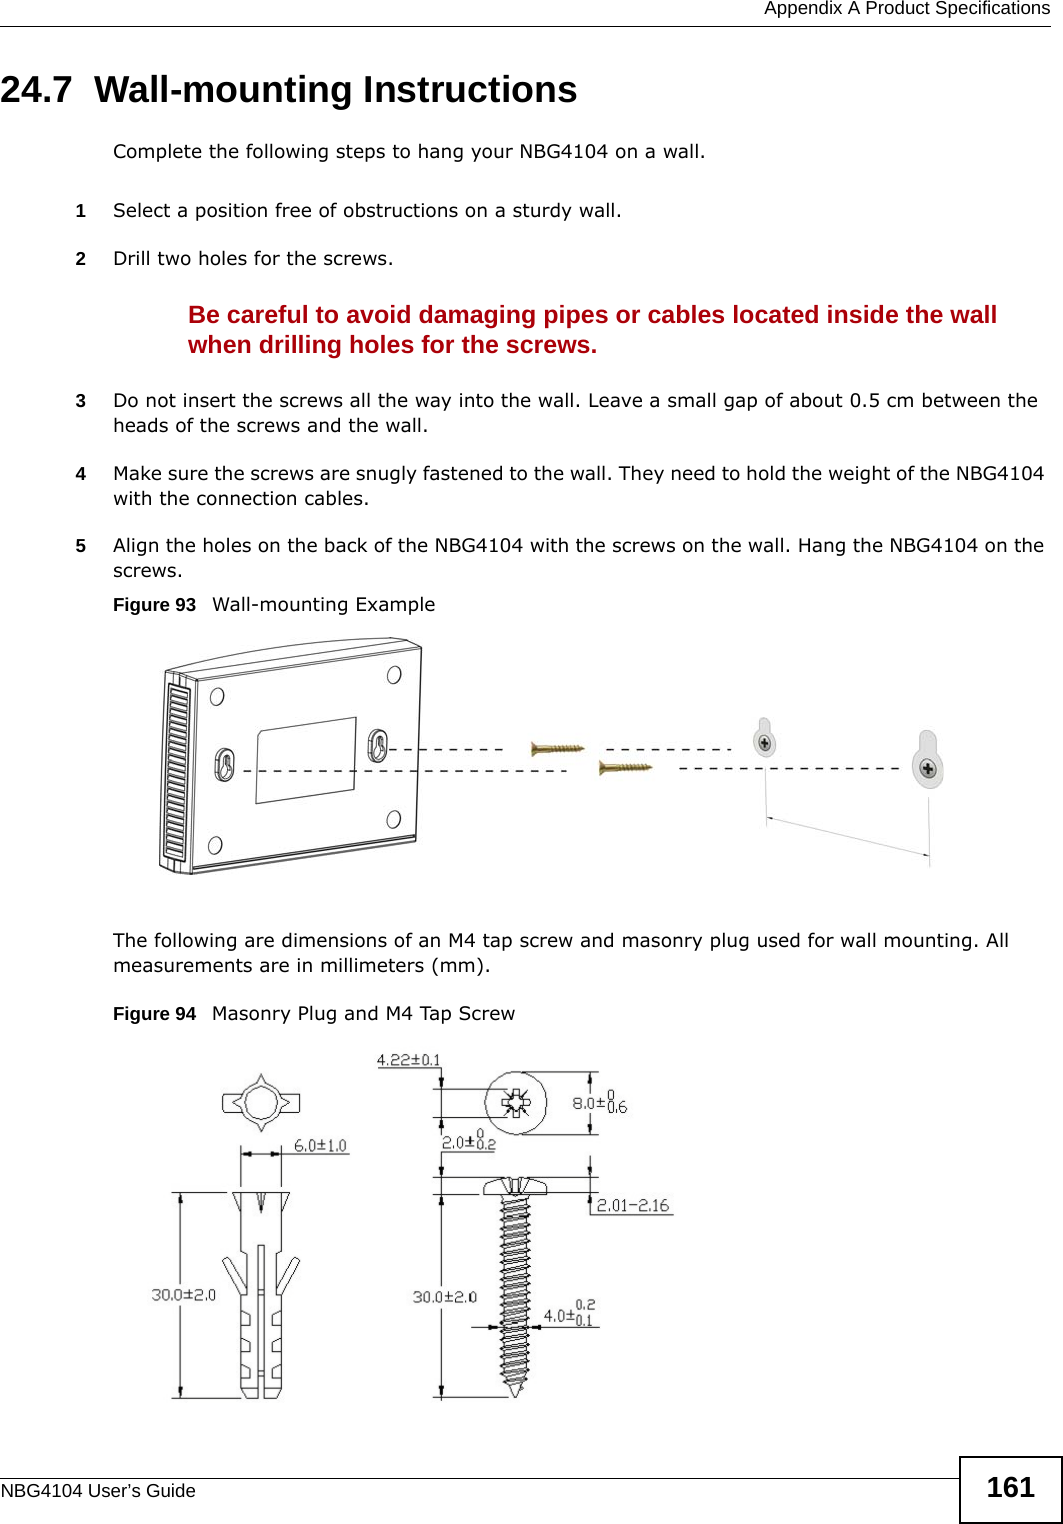  Appendix A Product SpecificationsNBG4104 User’s Guide 16124.7  Wall-mounting InstructionsComplete the following steps to hang your NBG4104 on a wall.1Select a position free of obstructions on a sturdy wall. 2Drill two holes for the screws. Be careful to avoid damaging pipes or cables located inside the wall when drilling holes for the screws.3Do not insert the screws all the way into the wall. Leave a small gap of about 0.5 cm between the heads of the screws and the wall. 4Make sure the screws are snugly fastened to the wall. They need to hold the weight of the NBG4104 with the connection cables. 5Align the holes on the back of the NBG4104 with the screws on the wall. Hang the NBG4104 on the screws.Figure 93   Wall-mounting ExampleThe following are dimensions of an M4 tap screw and masonry plug used for wall mounting. All measurements are in millimeters (mm). Figure 94   Masonry Plug and M4 Tap Screw